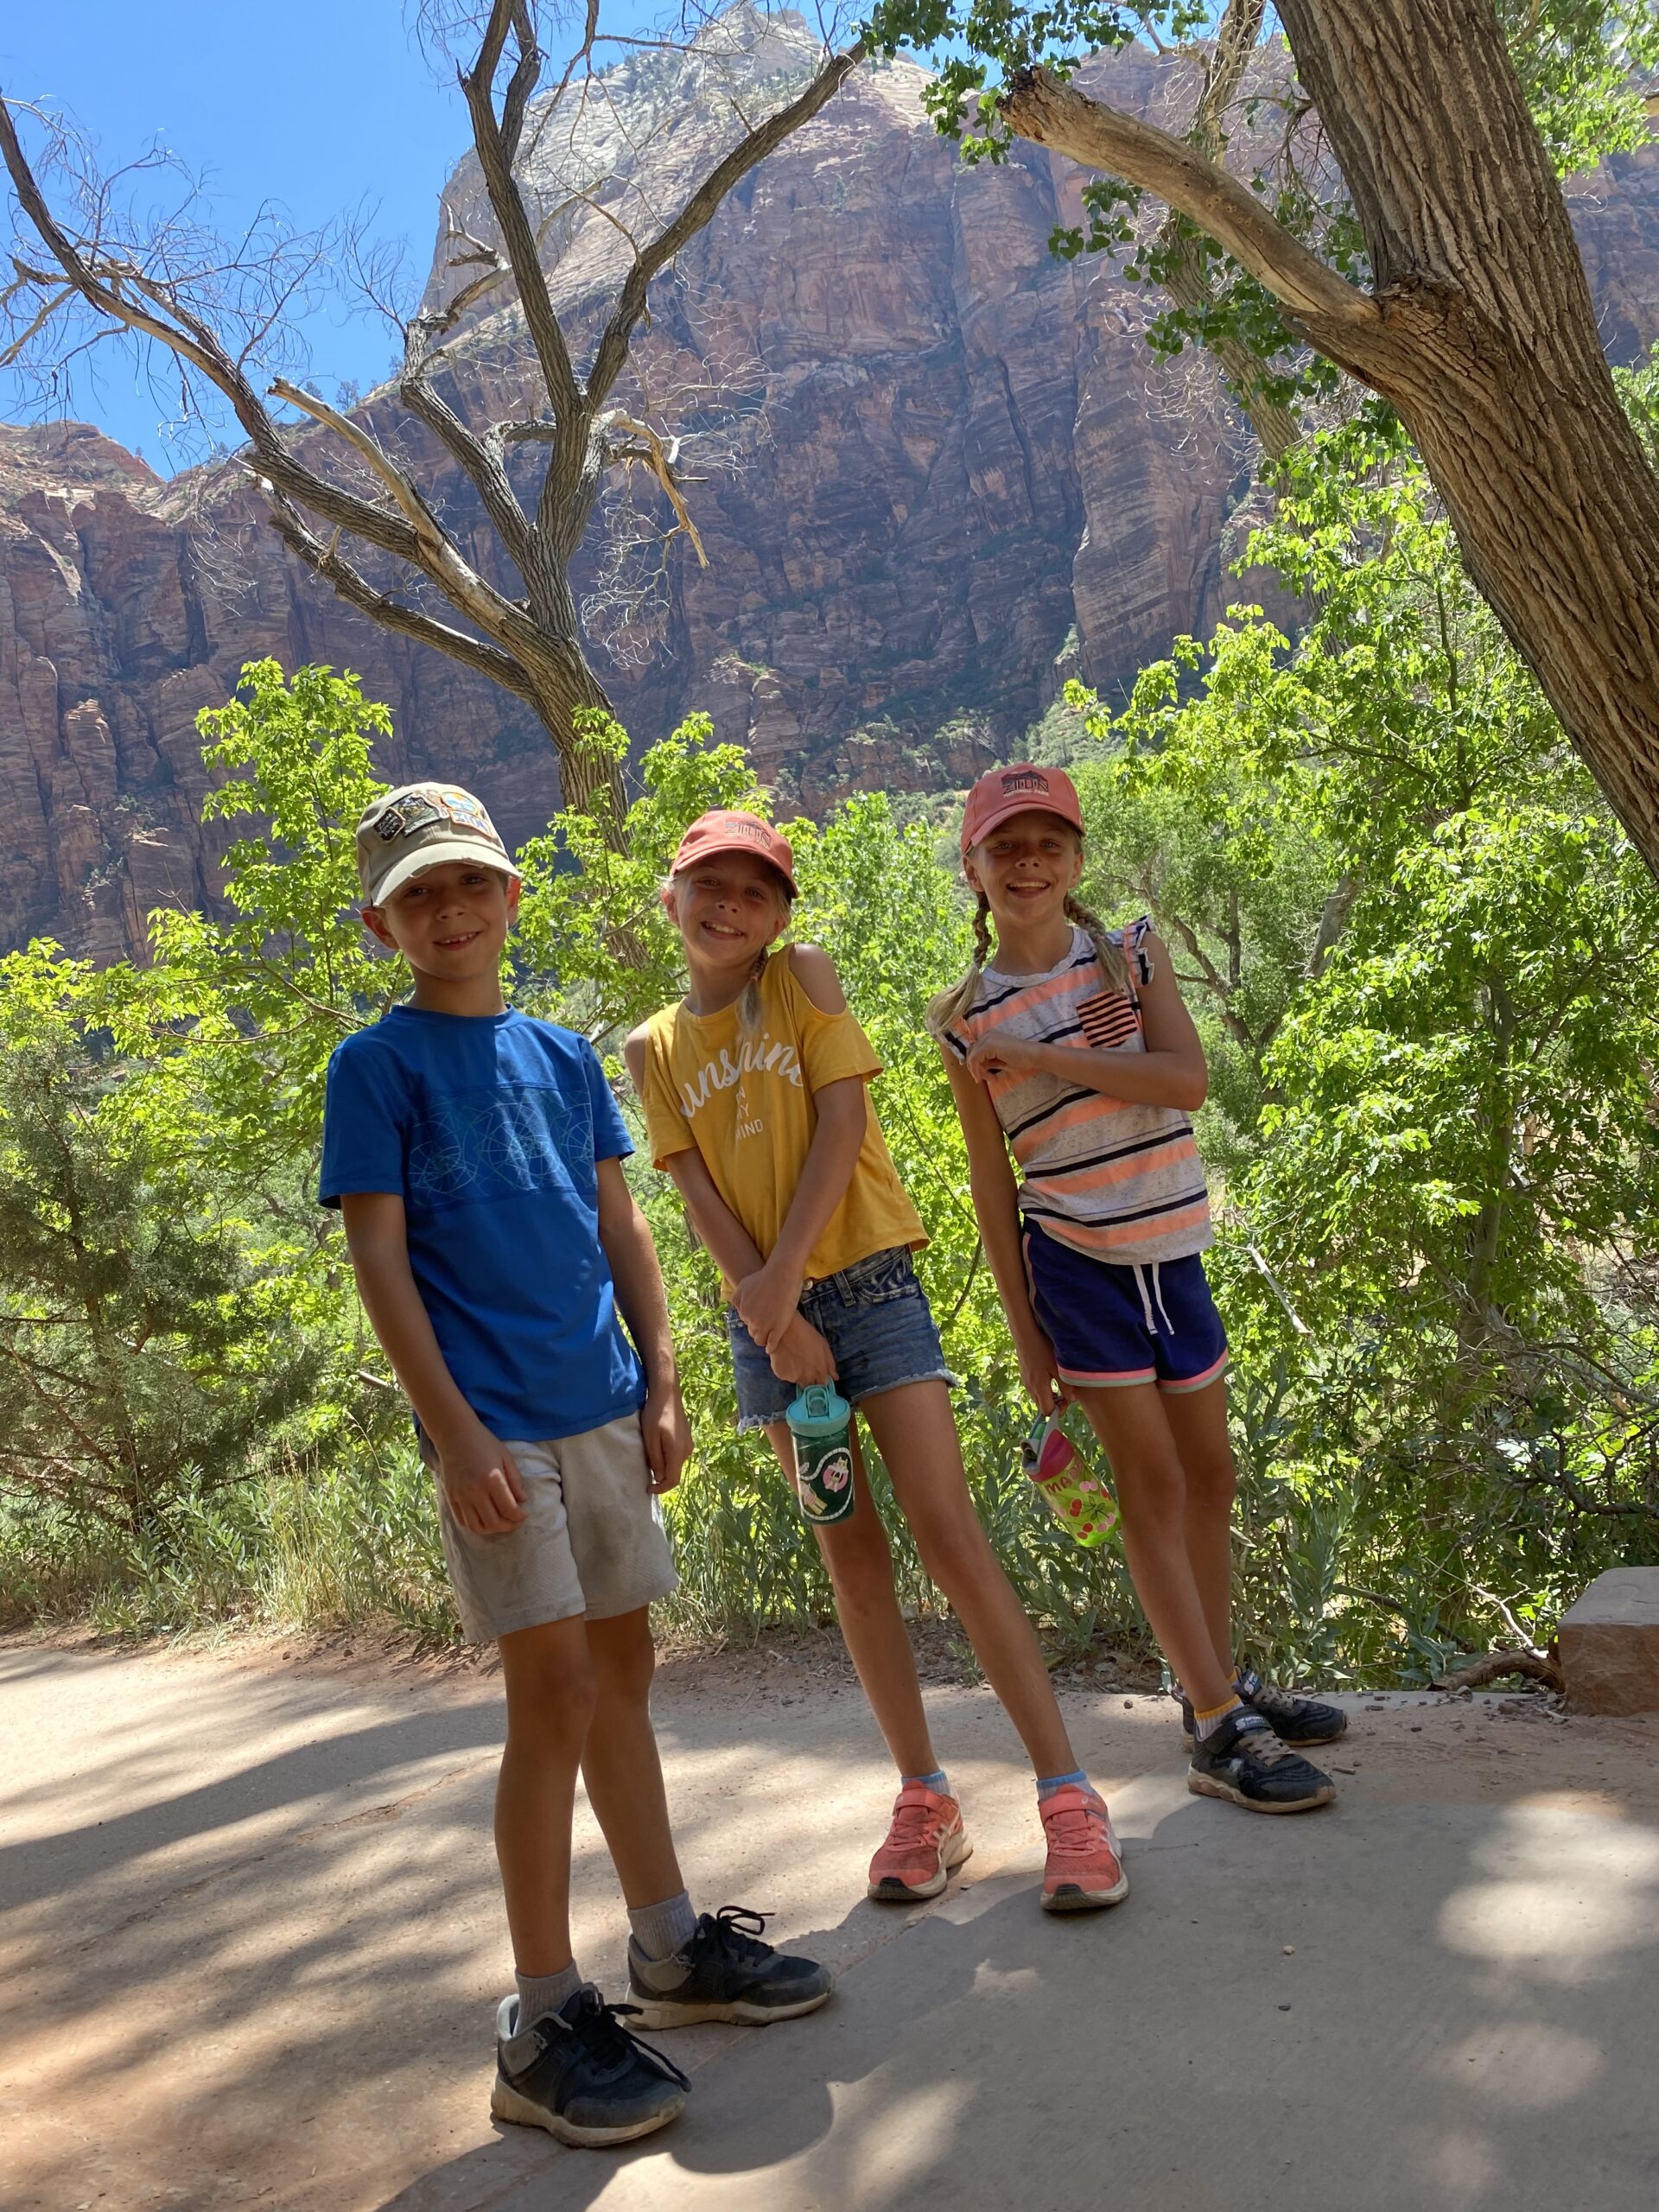 https://www.simplysweetdays.com/wp-content/uploads/2022/06/Visiting-Zion-National-Park-with-Kids-scaled.jpg